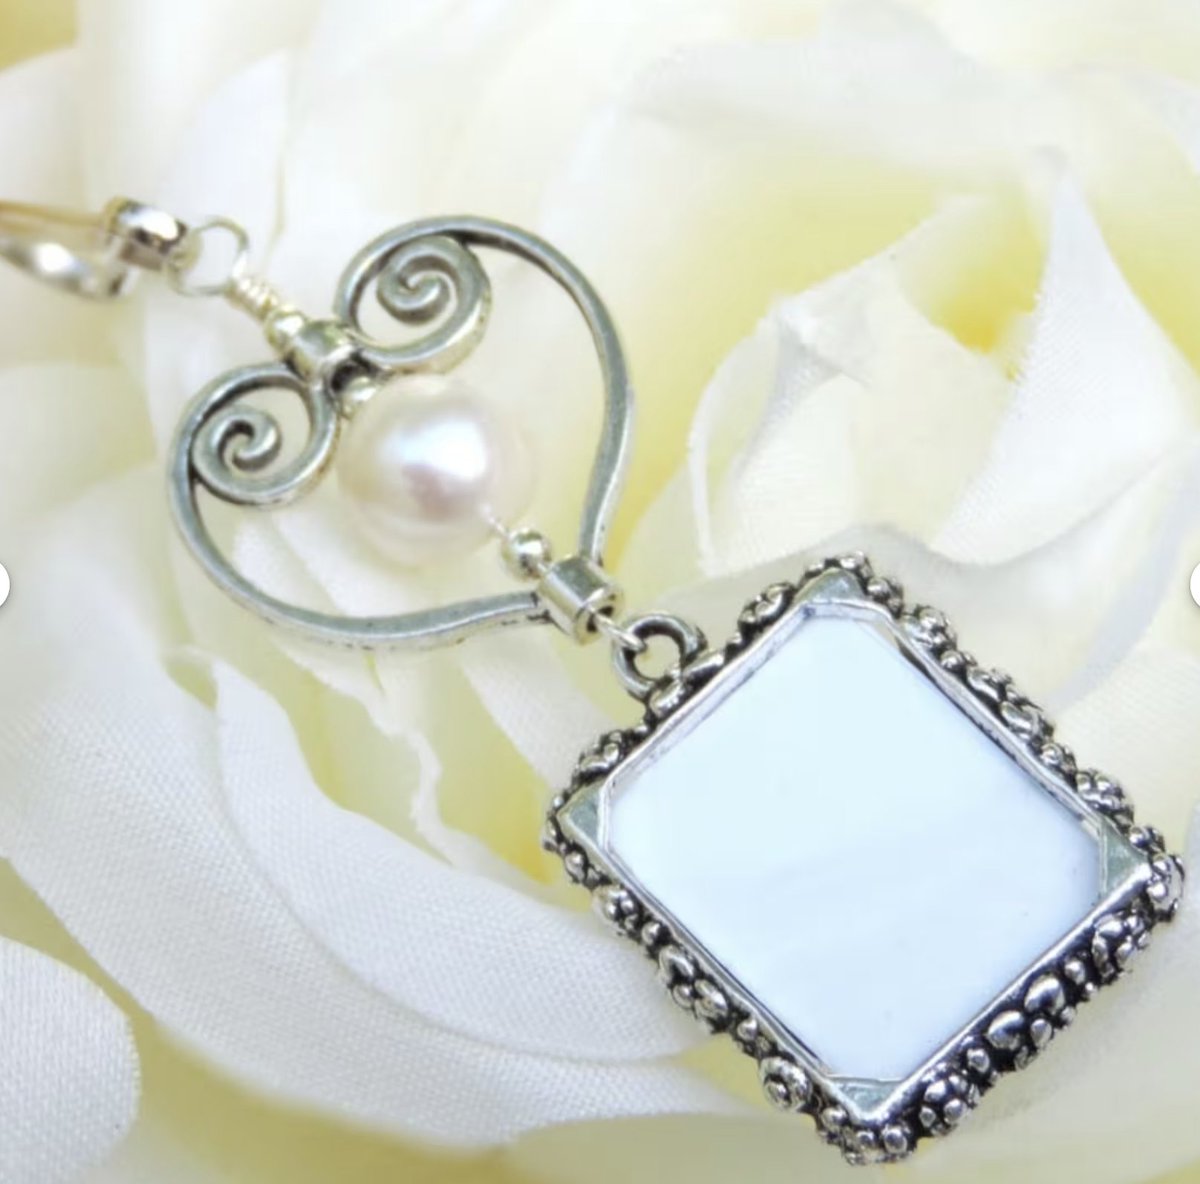 Wedding bouquet photo charm with small picture frame, heart and pearl. Memorial keepsake. smilingbluedog.etsy.com/listing/253706… via @Etsy #etsyseller #memory #family #memento #shopping #onlineshopping #womaninbiz #etsypreneur #etsyfinds #shopsmall #heart #lovely #giftideas